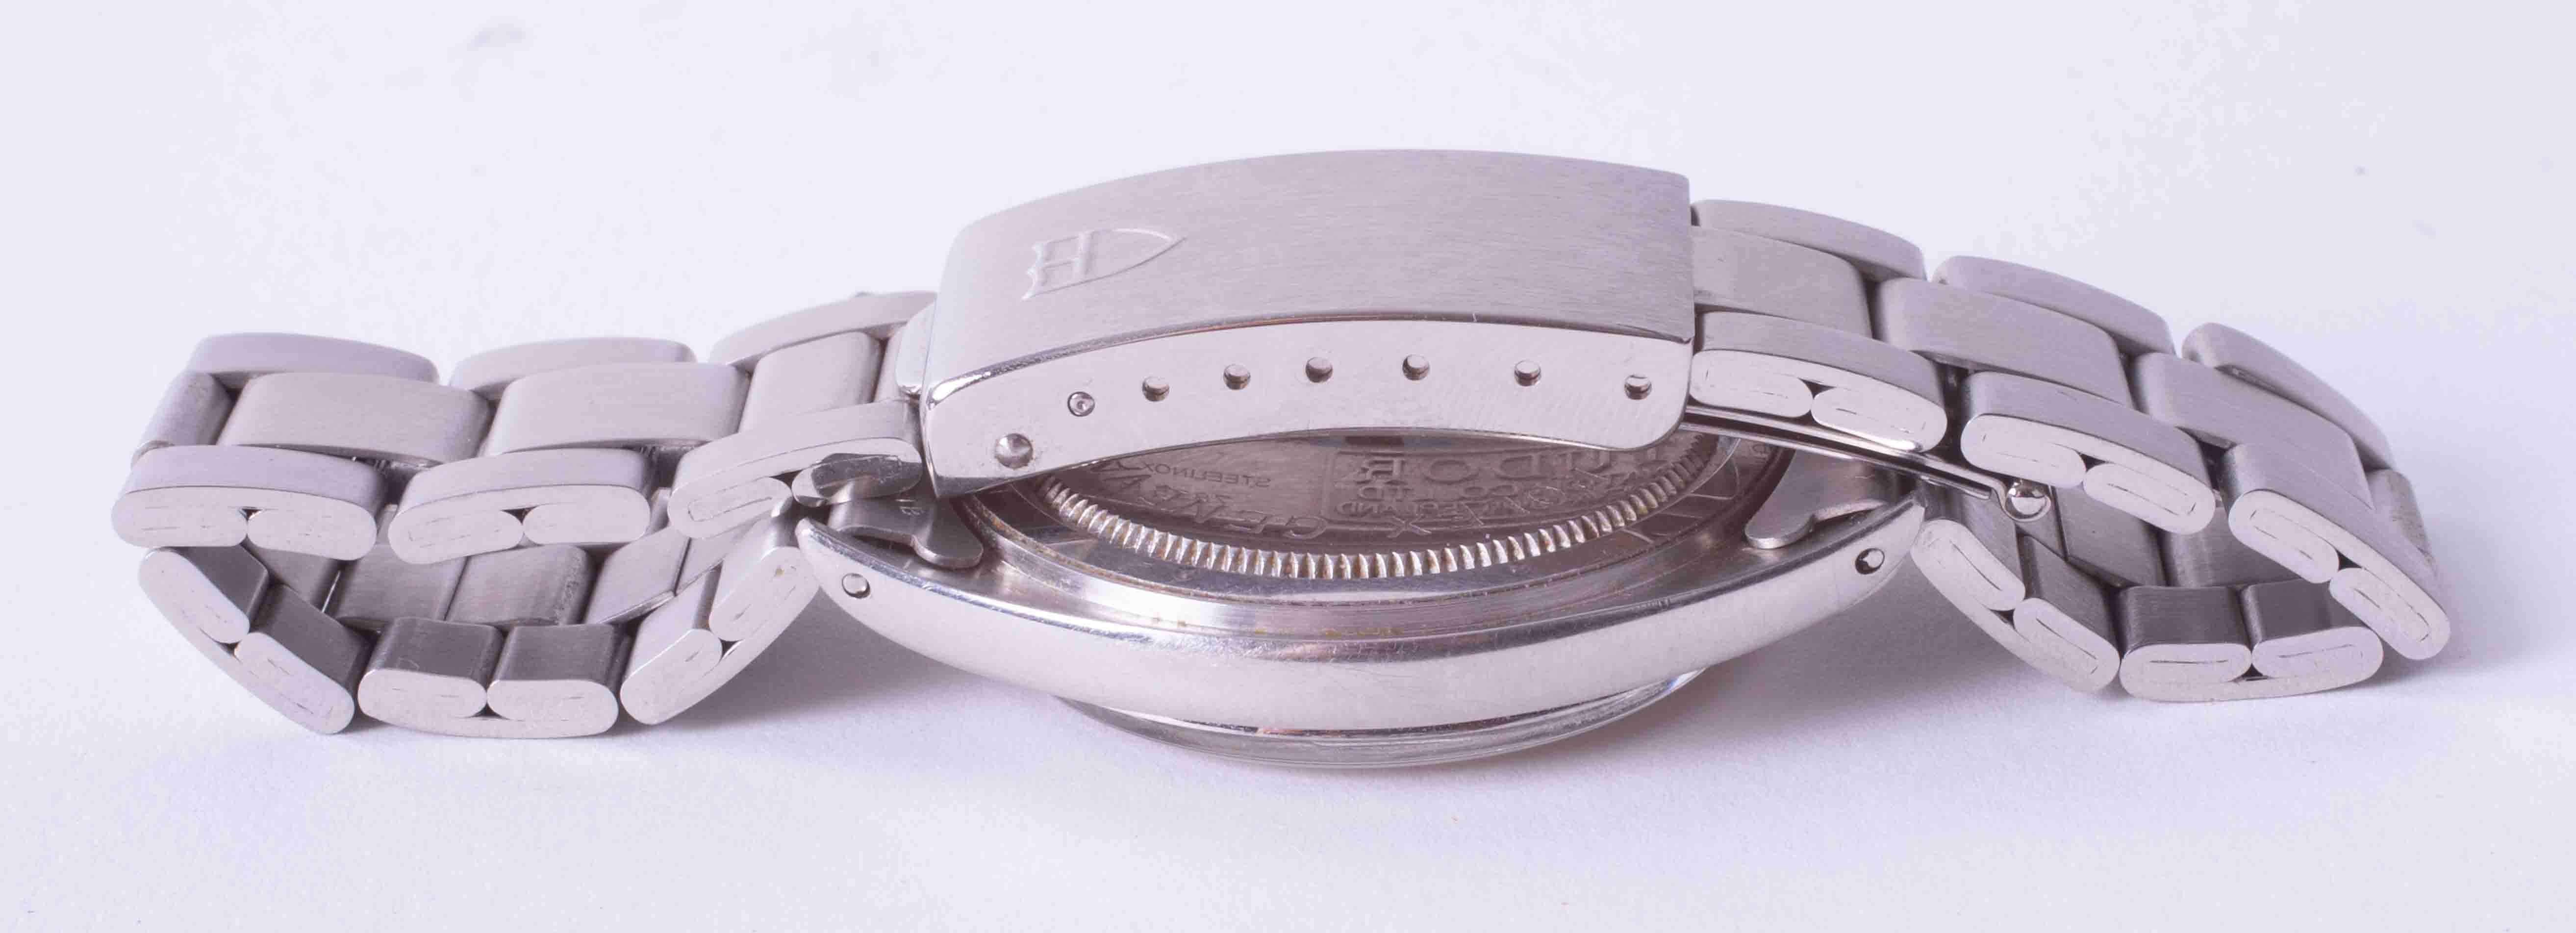 Tudor, Oyster Royal gent's manual wind shock resistant stainless steel wristwatch, 1958/1960, - Image 2 of 5